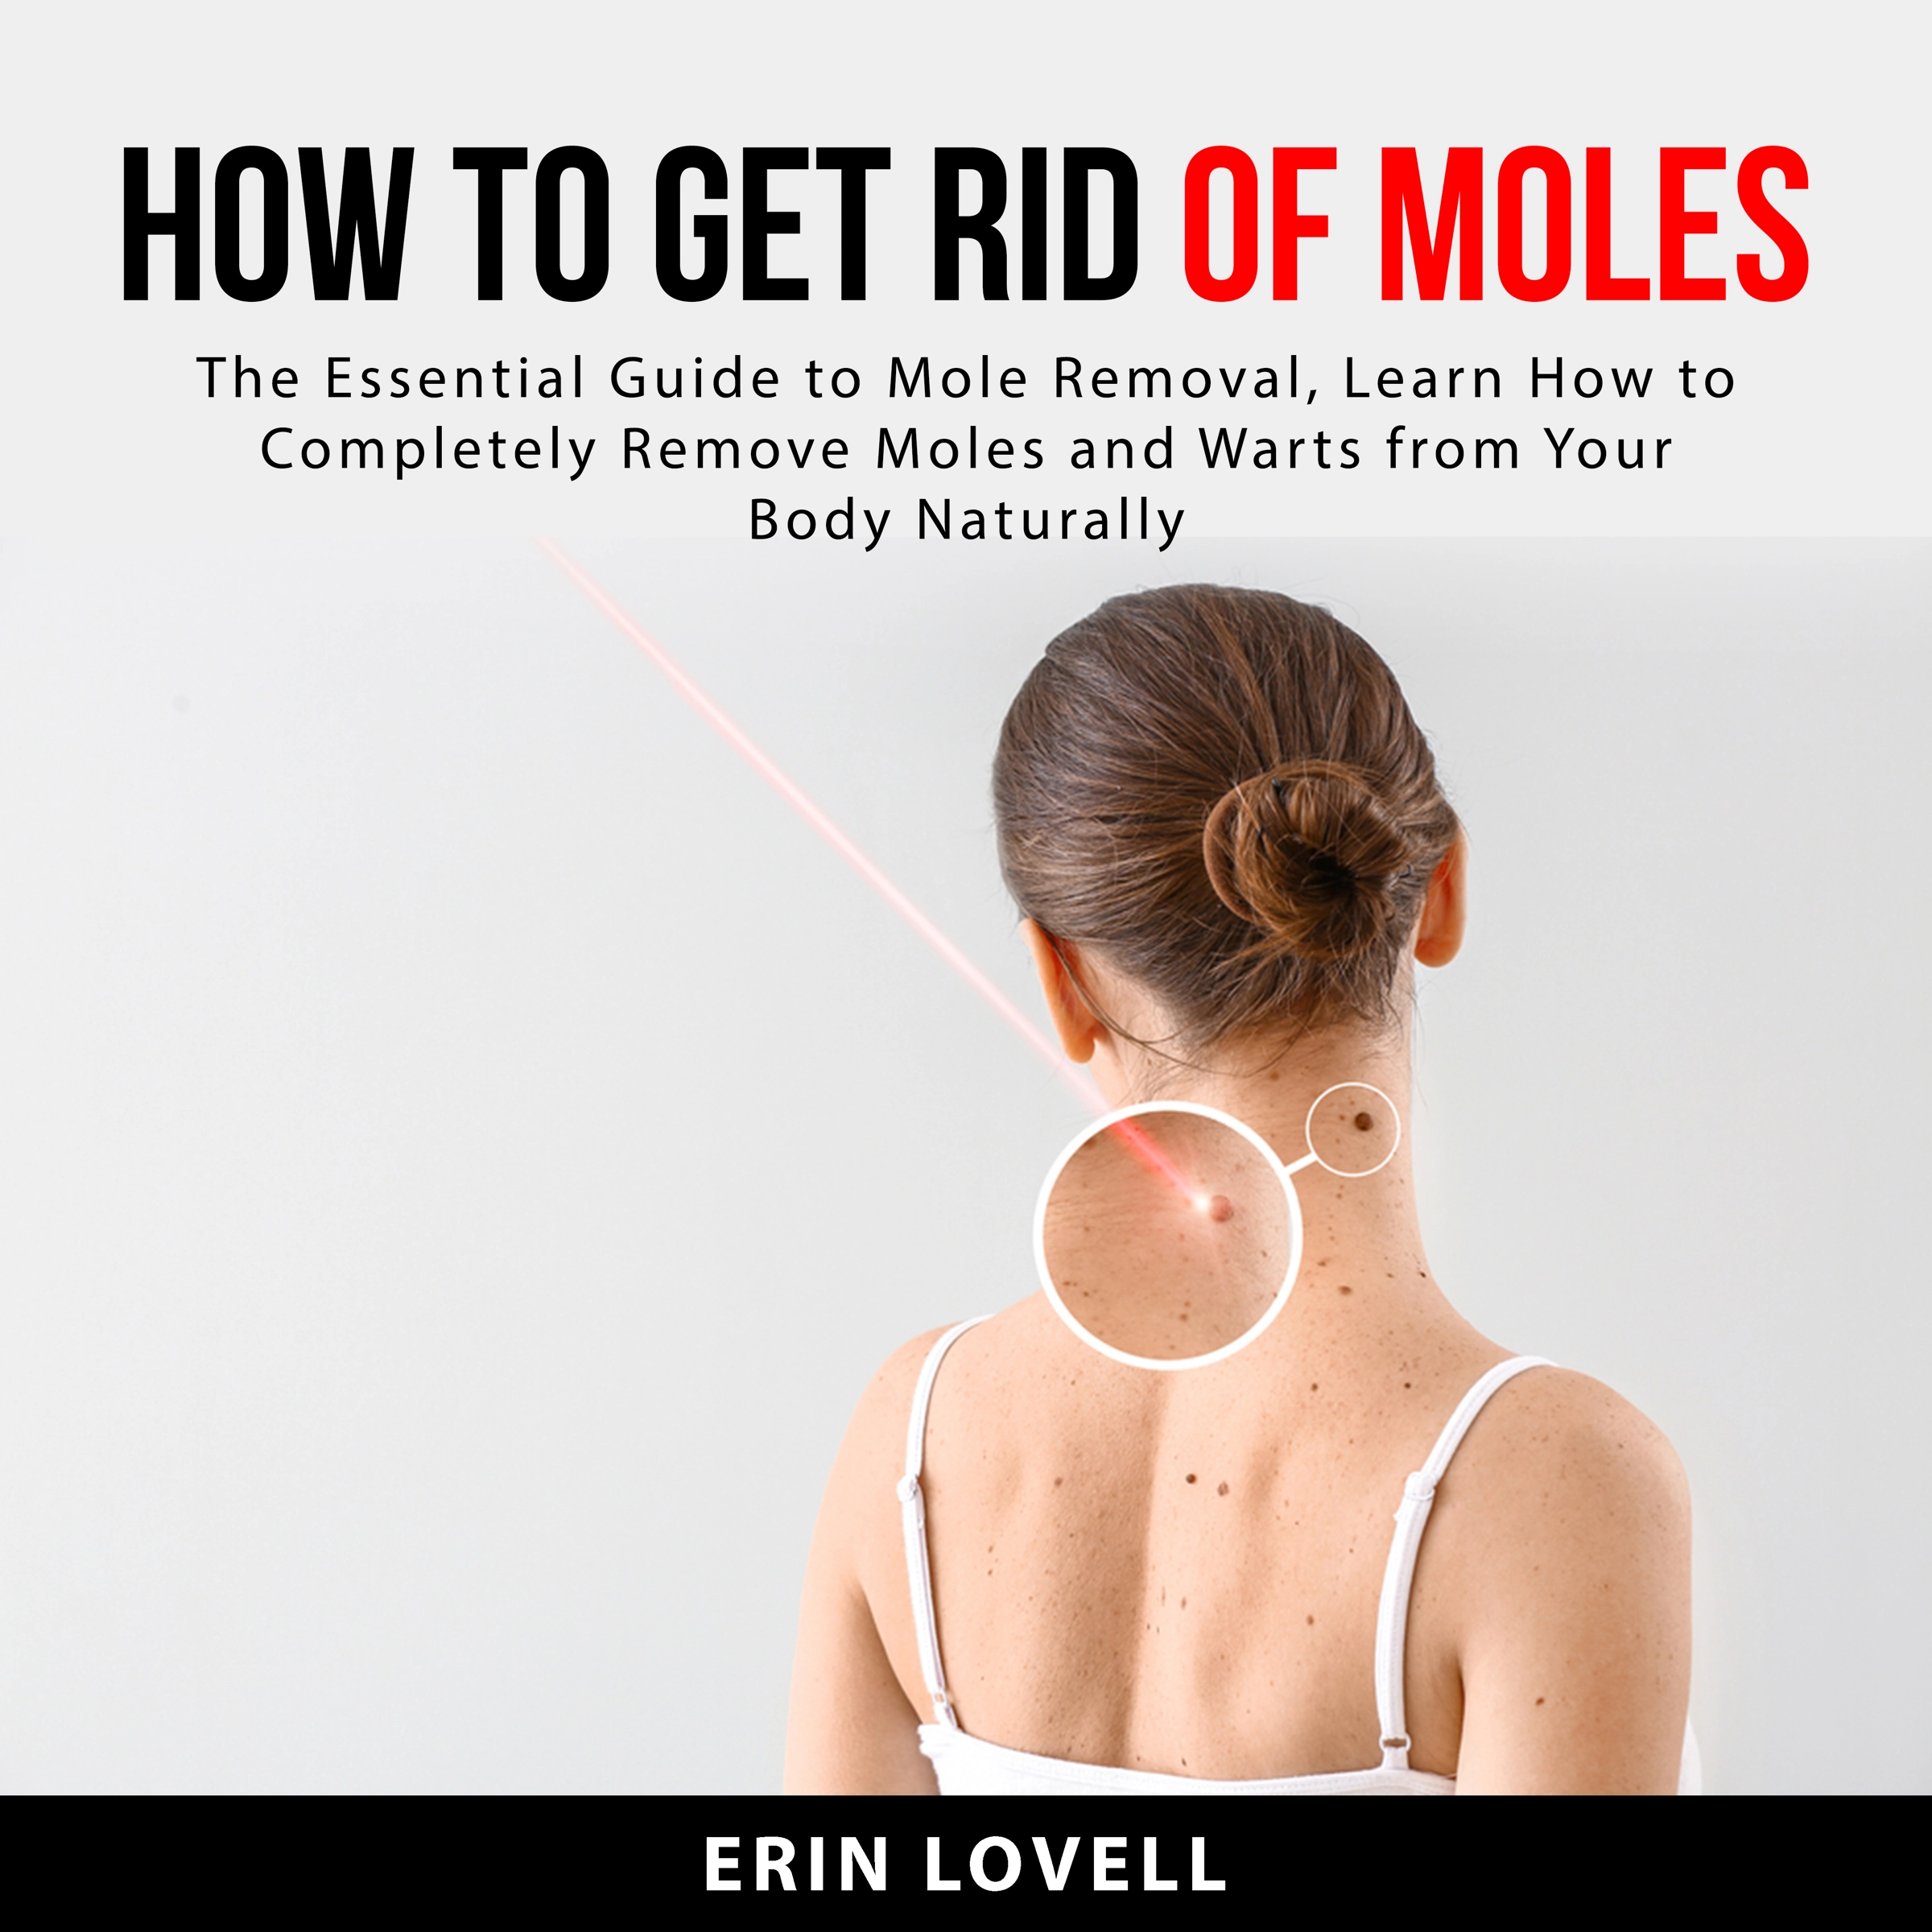 How to Get Rid of Moles Audiobook by Erin Lovell